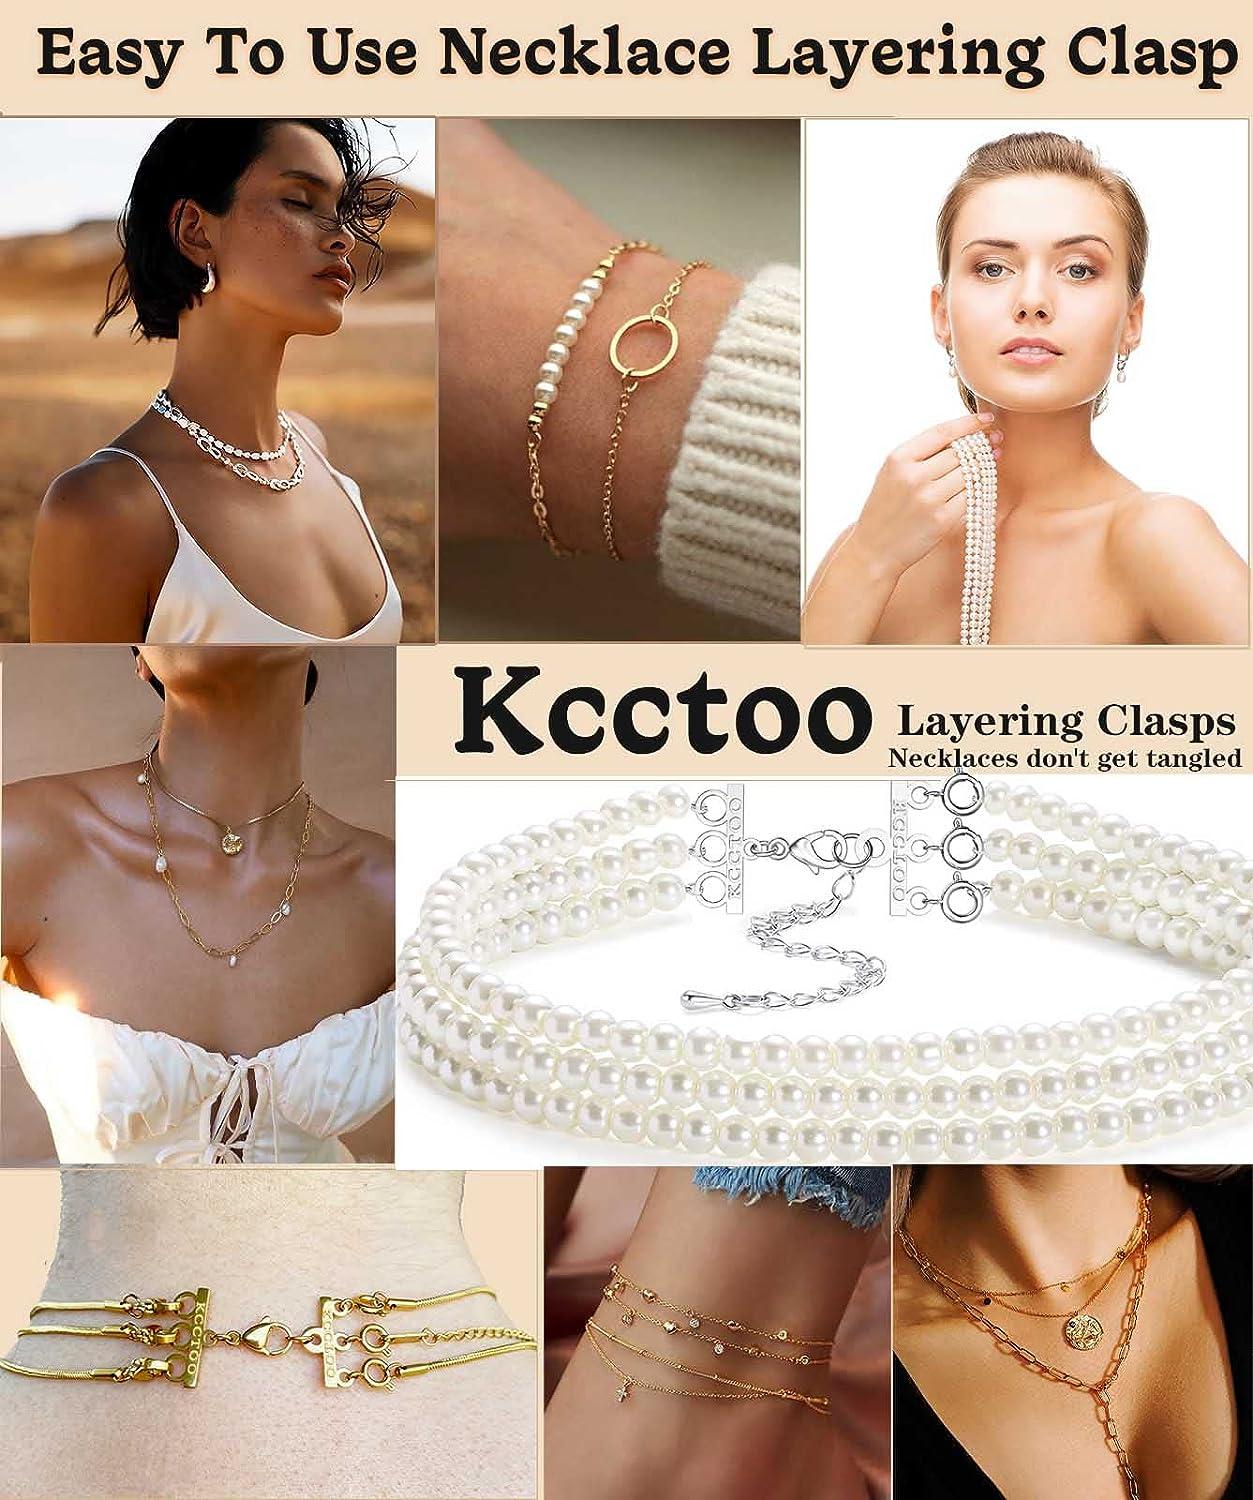 Kcctoo Necklace Connectors for Multiple Necklace Layering Clasps